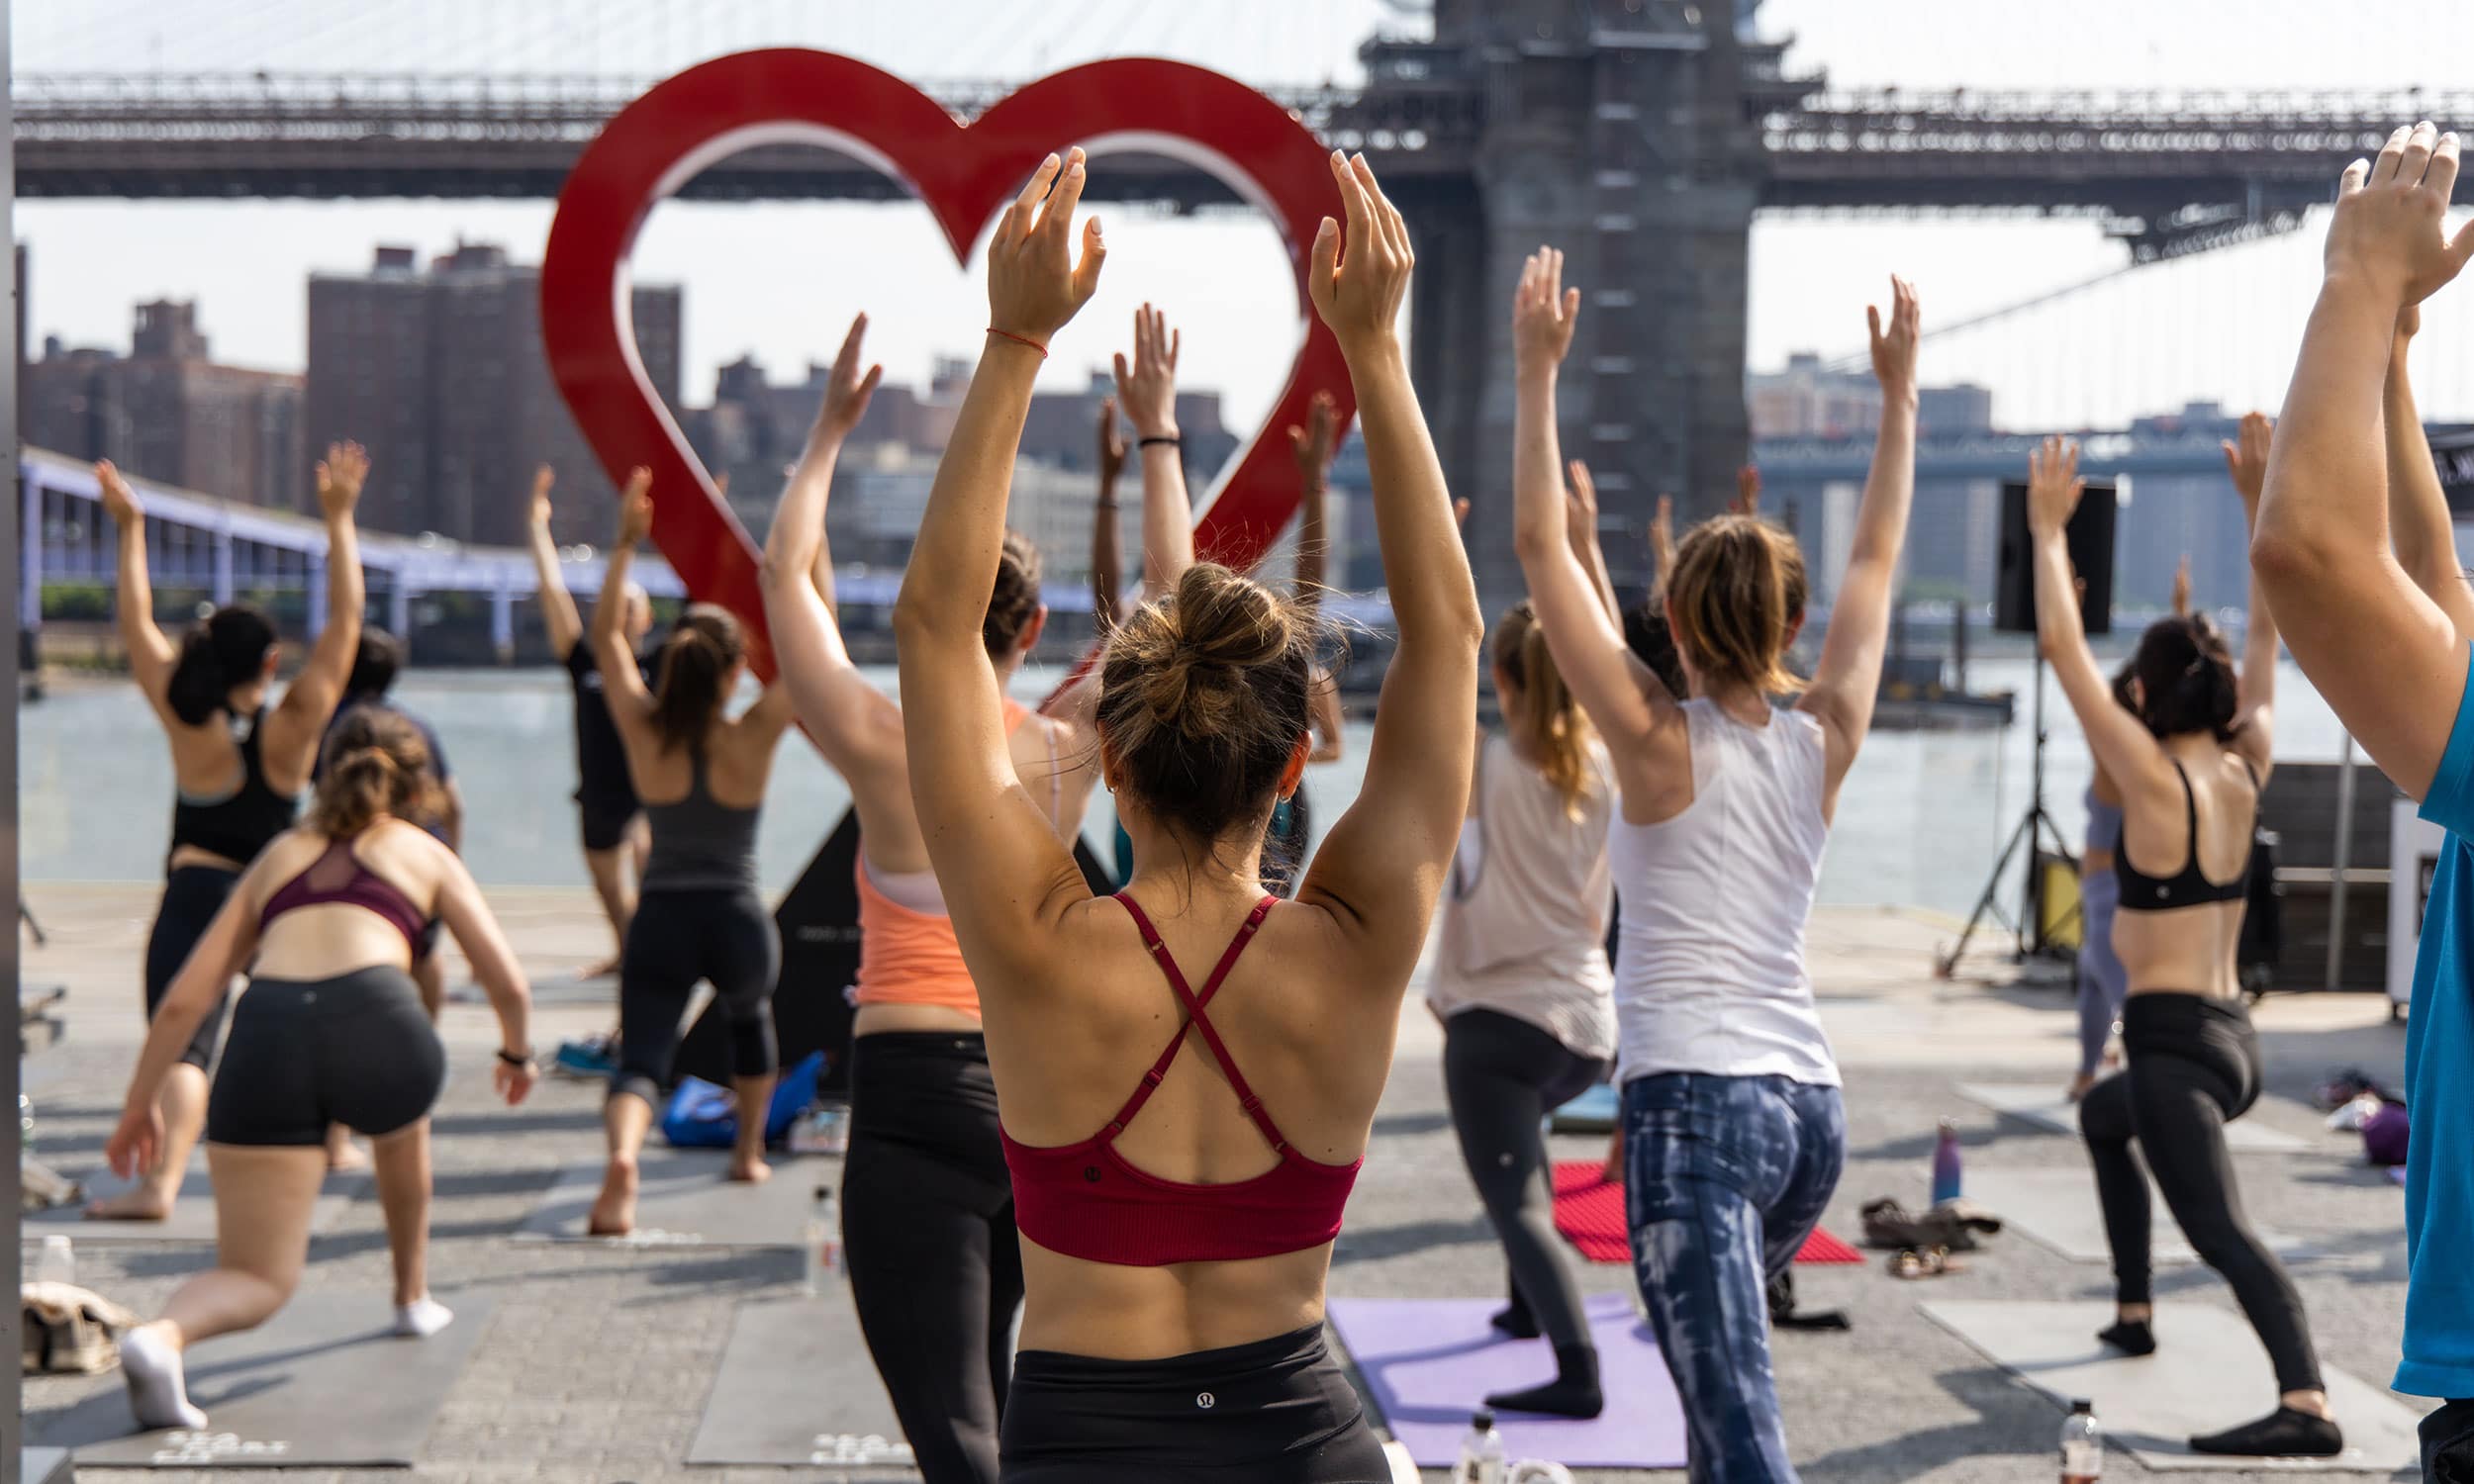 Yoga at the seaport